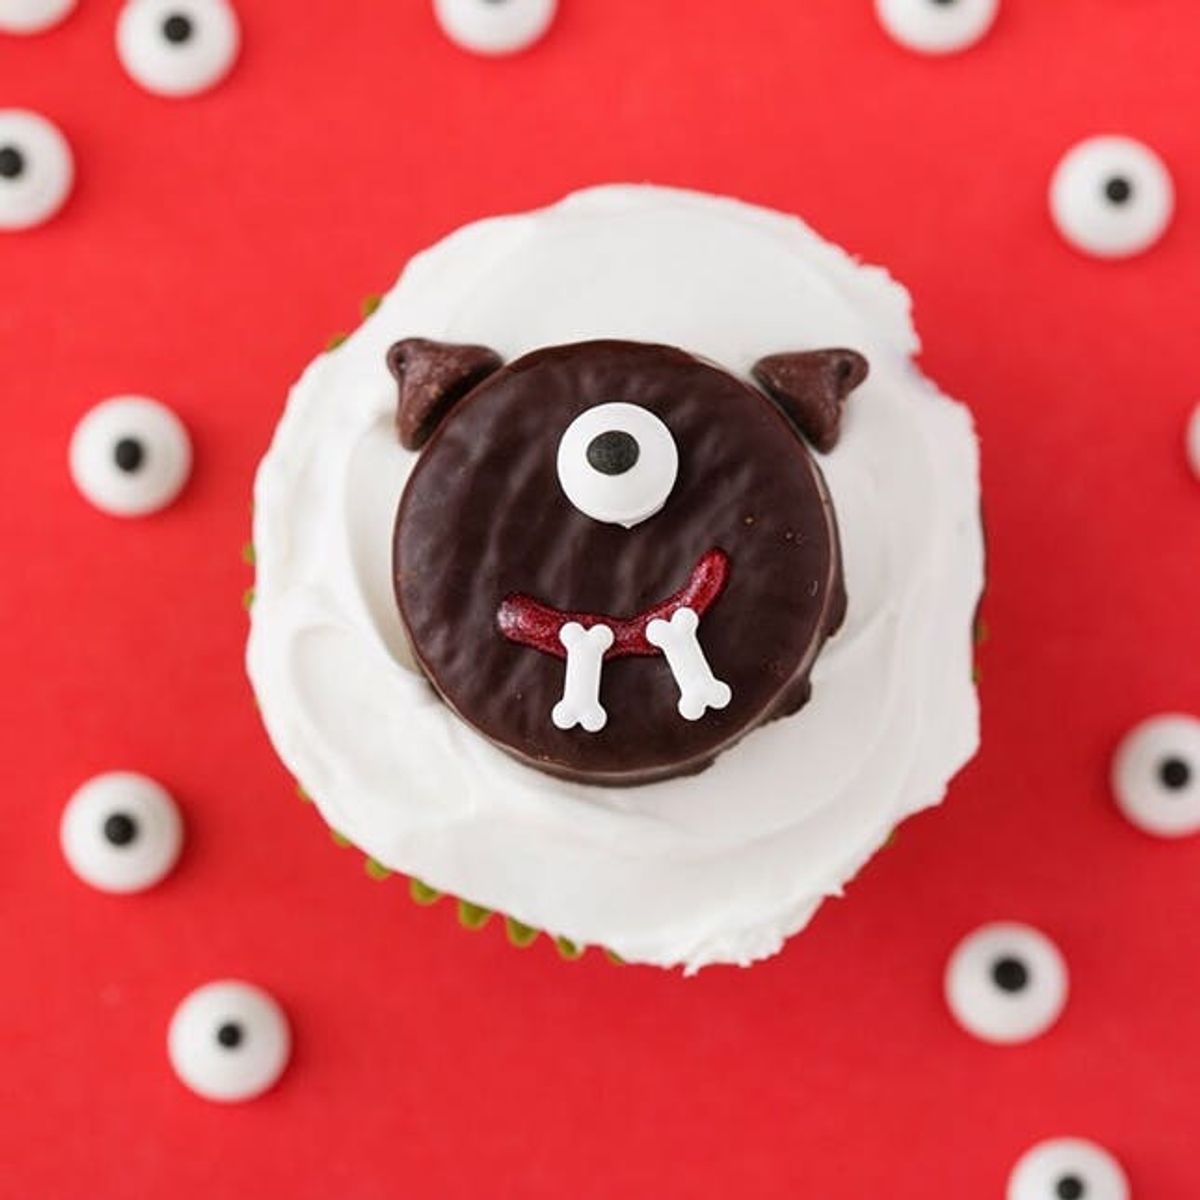 How to Make These Insanely Cute Cyclops Cupcakes for Halloween